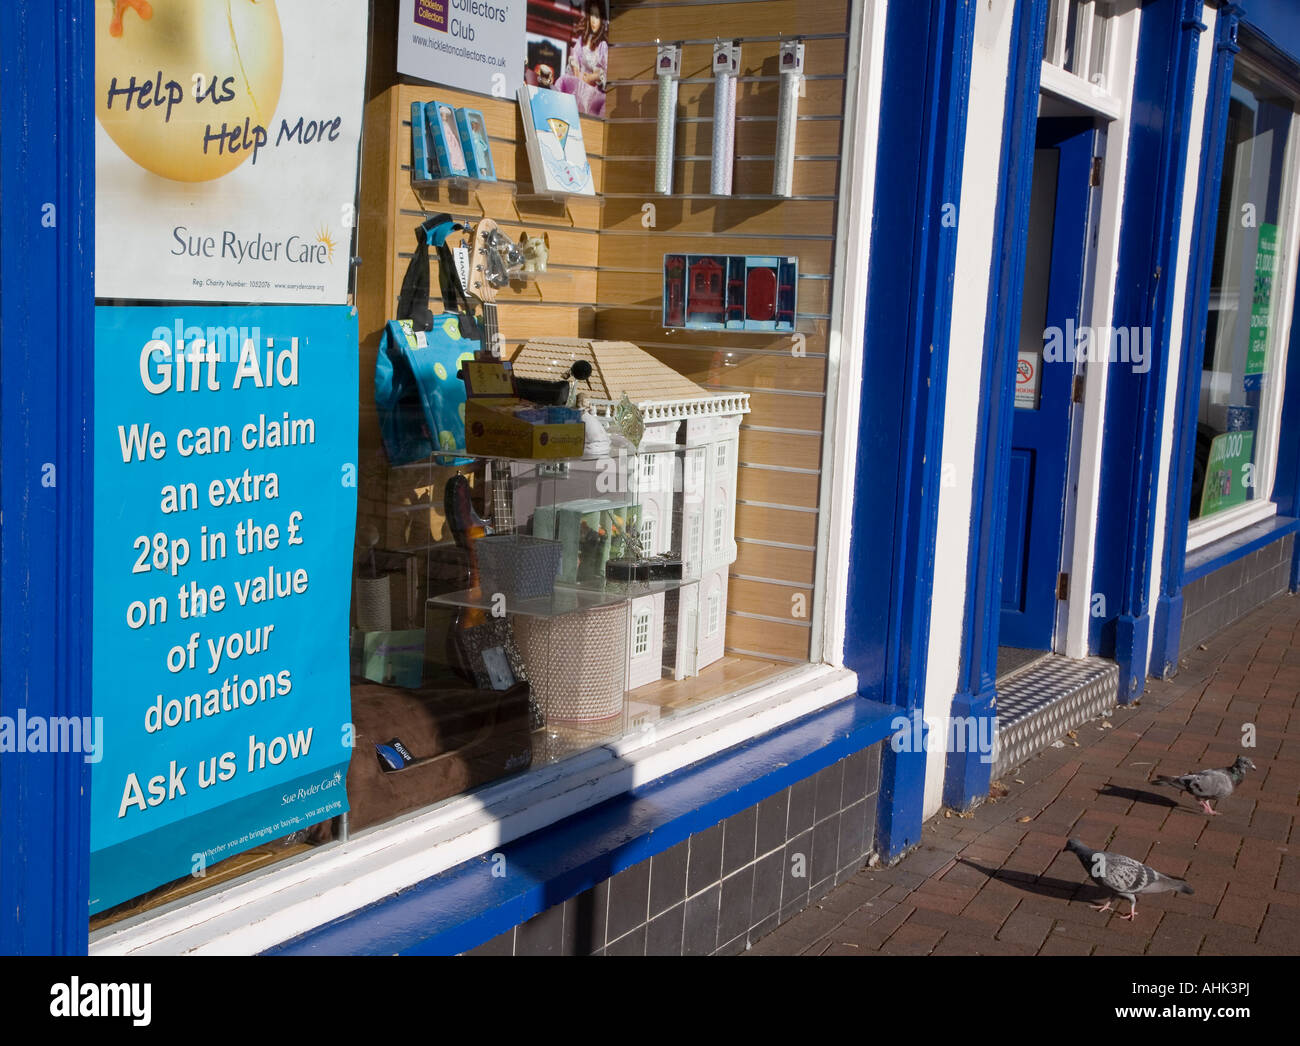 Charity shop with gift aid poster in window Wales UK Stock Photo